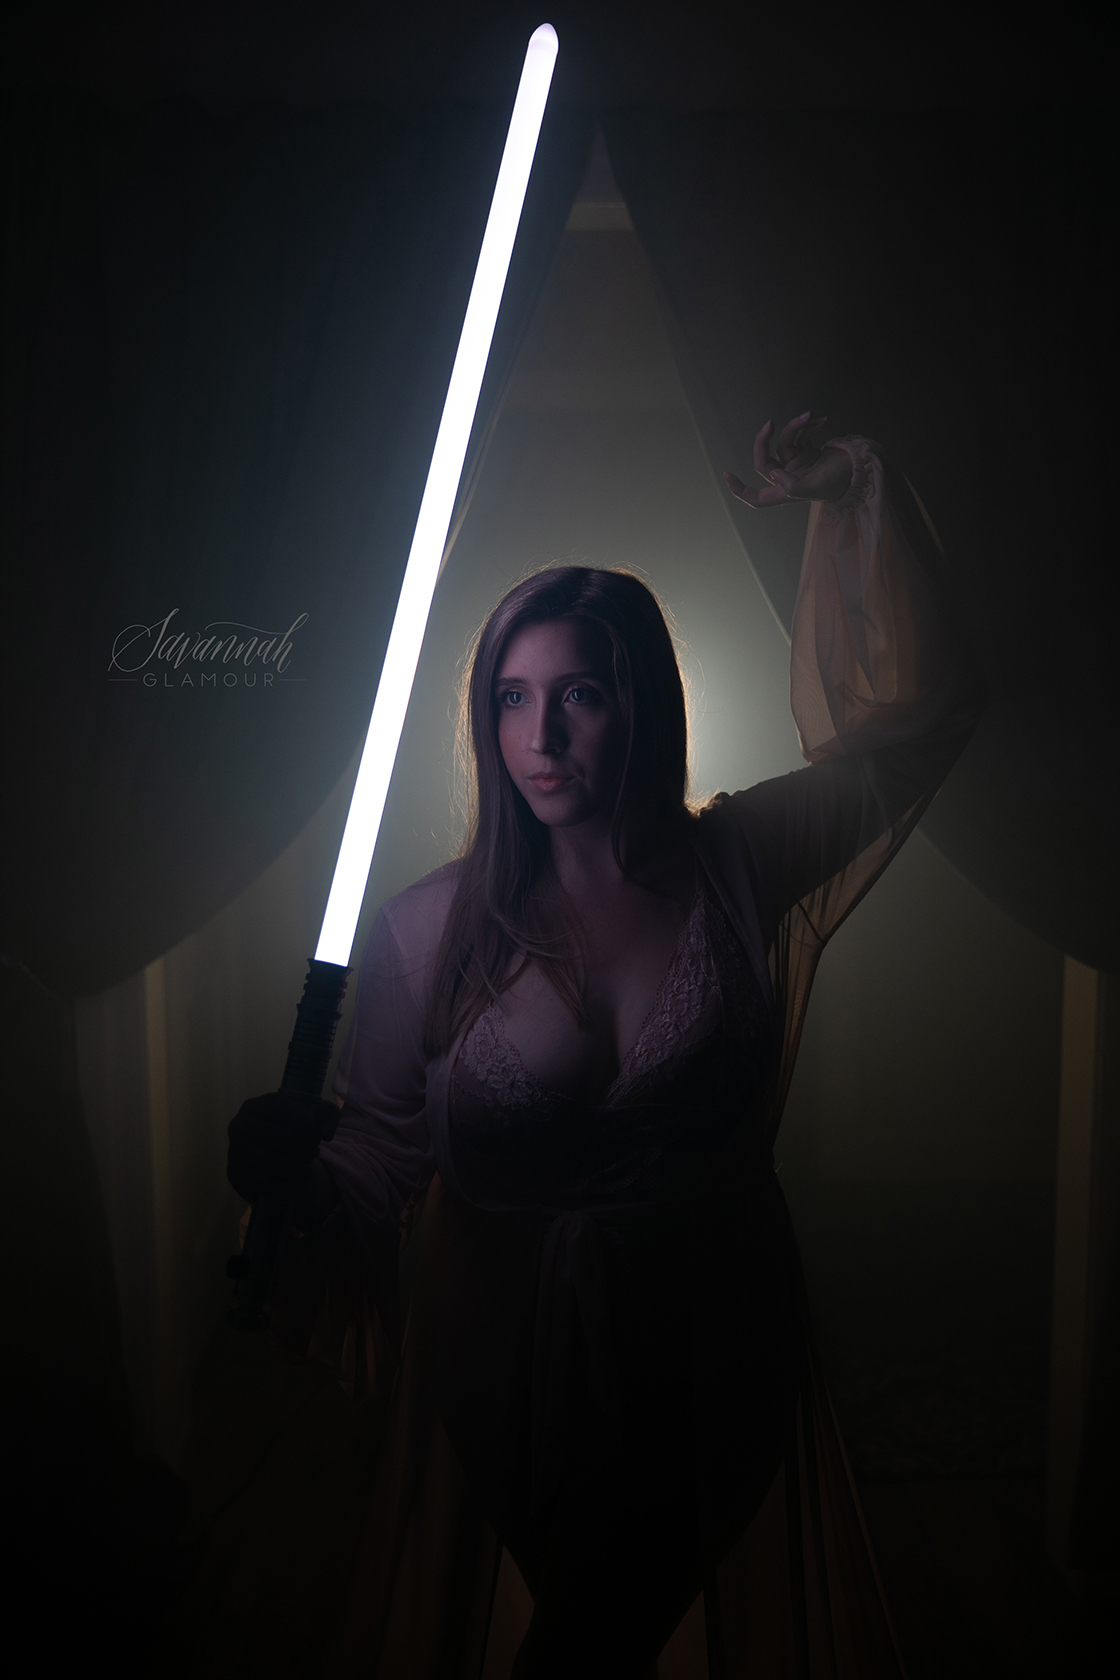 portrait of woman in a sheer dress holding a lightsaber